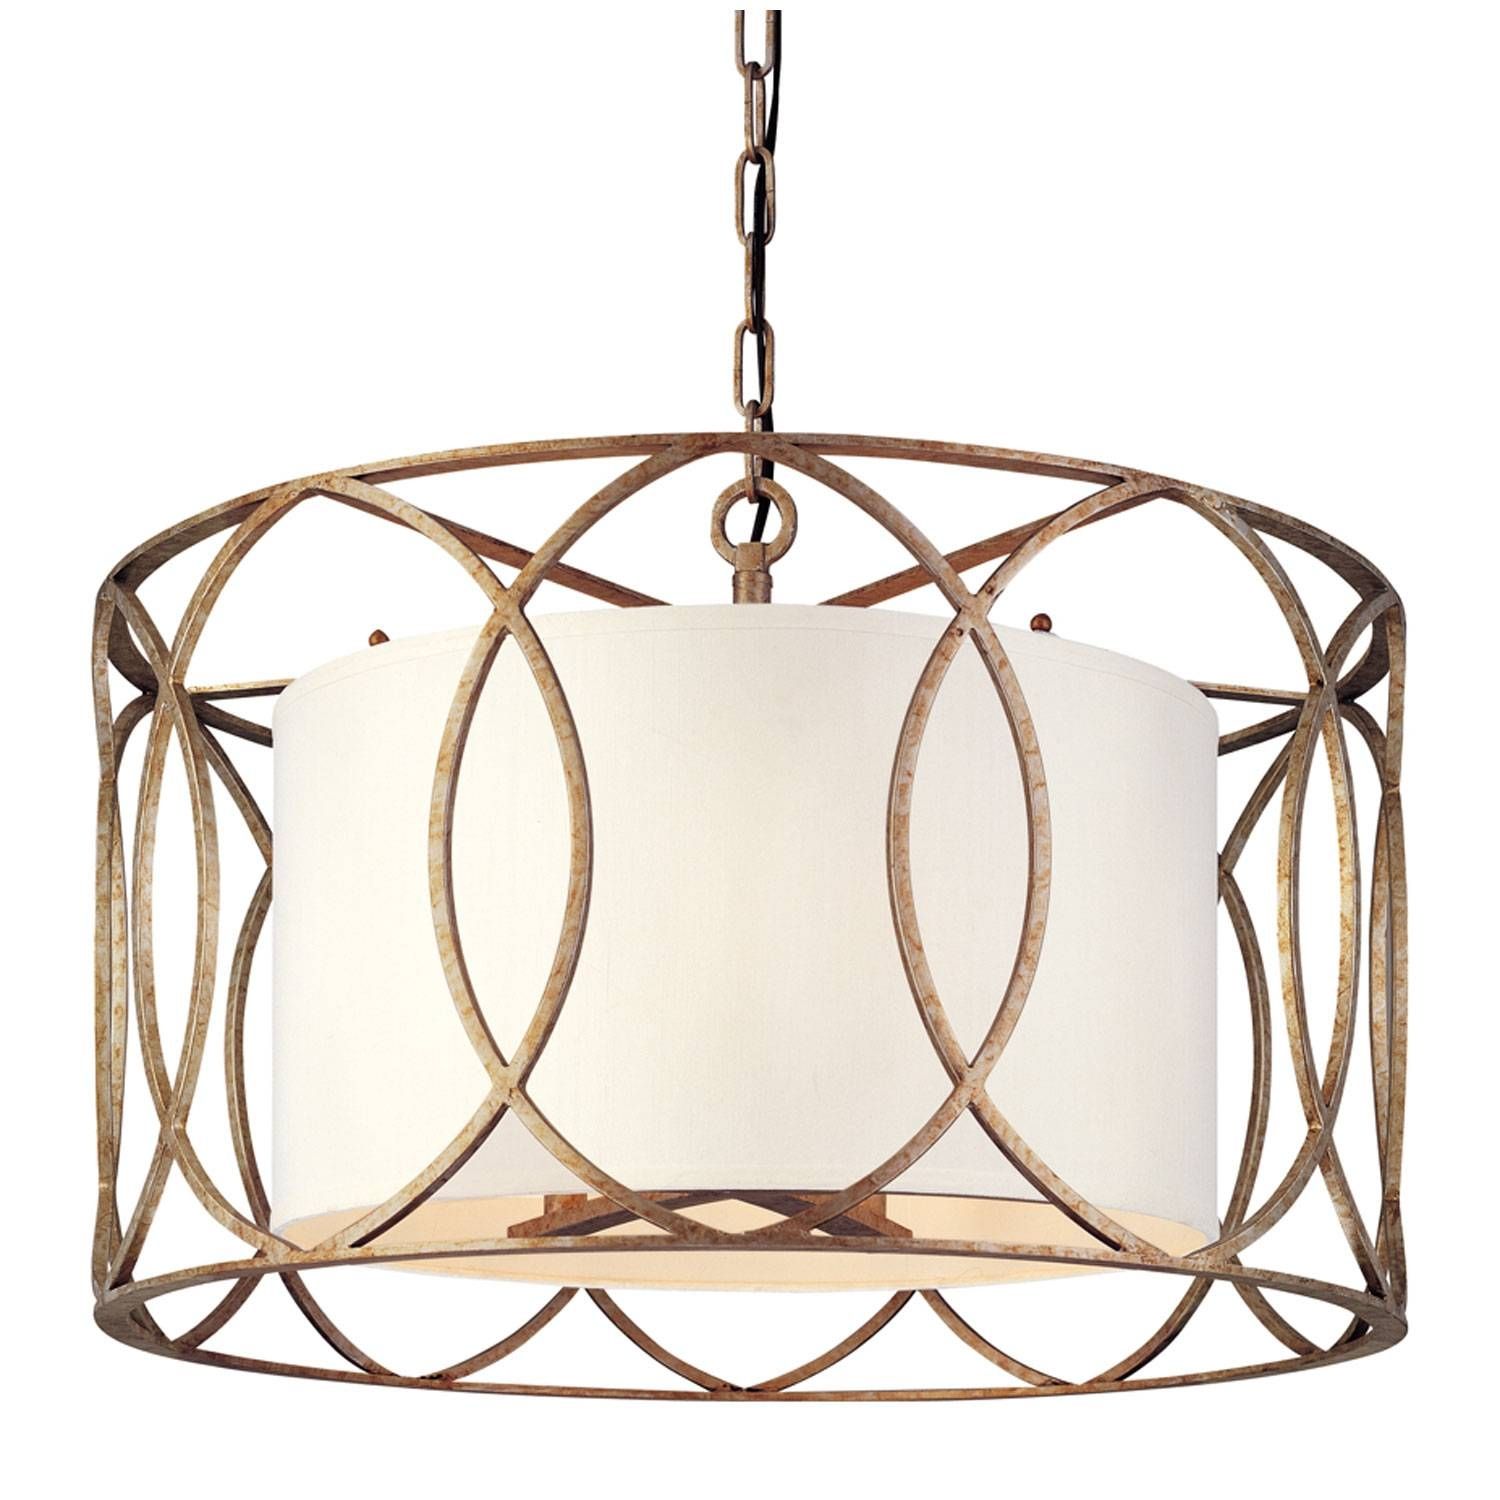 Troy Sausalito Five Light Drum Pendant On Sale Intended For Troy Lighting Sausalito Pendants (View 2 of 15)